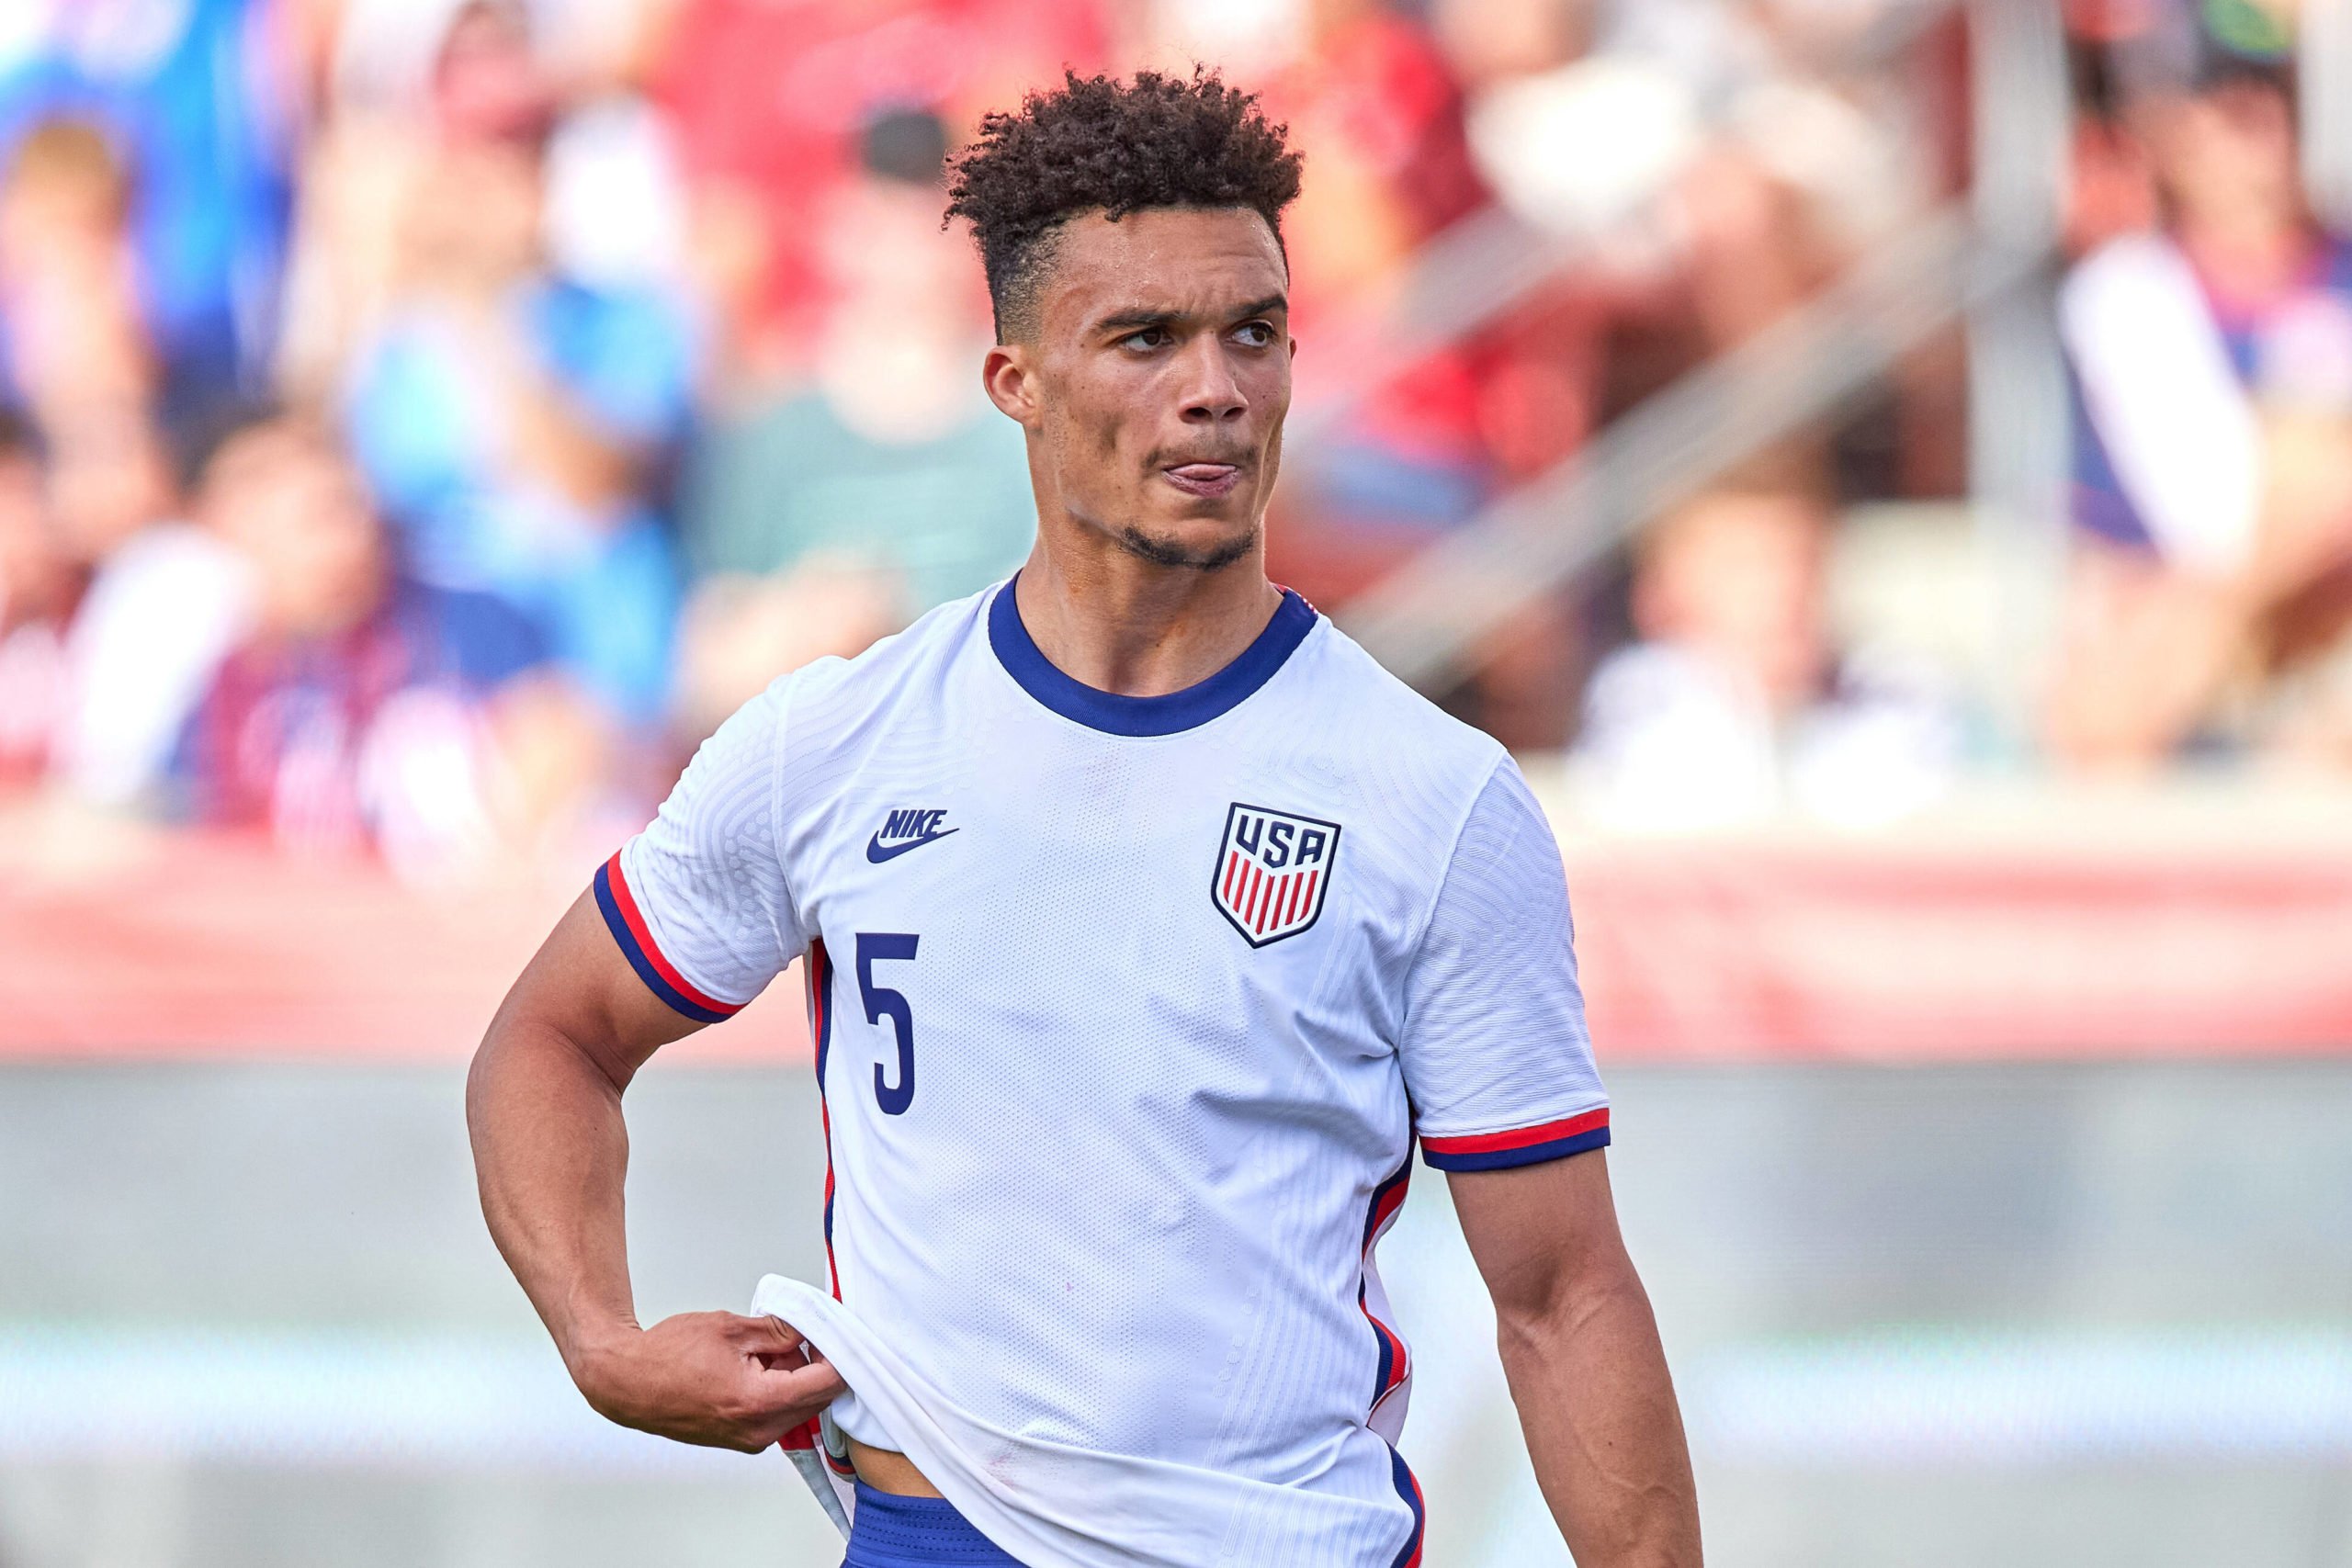 Wolves have joined the race to sign Antonee Robinson - A potential bargain.